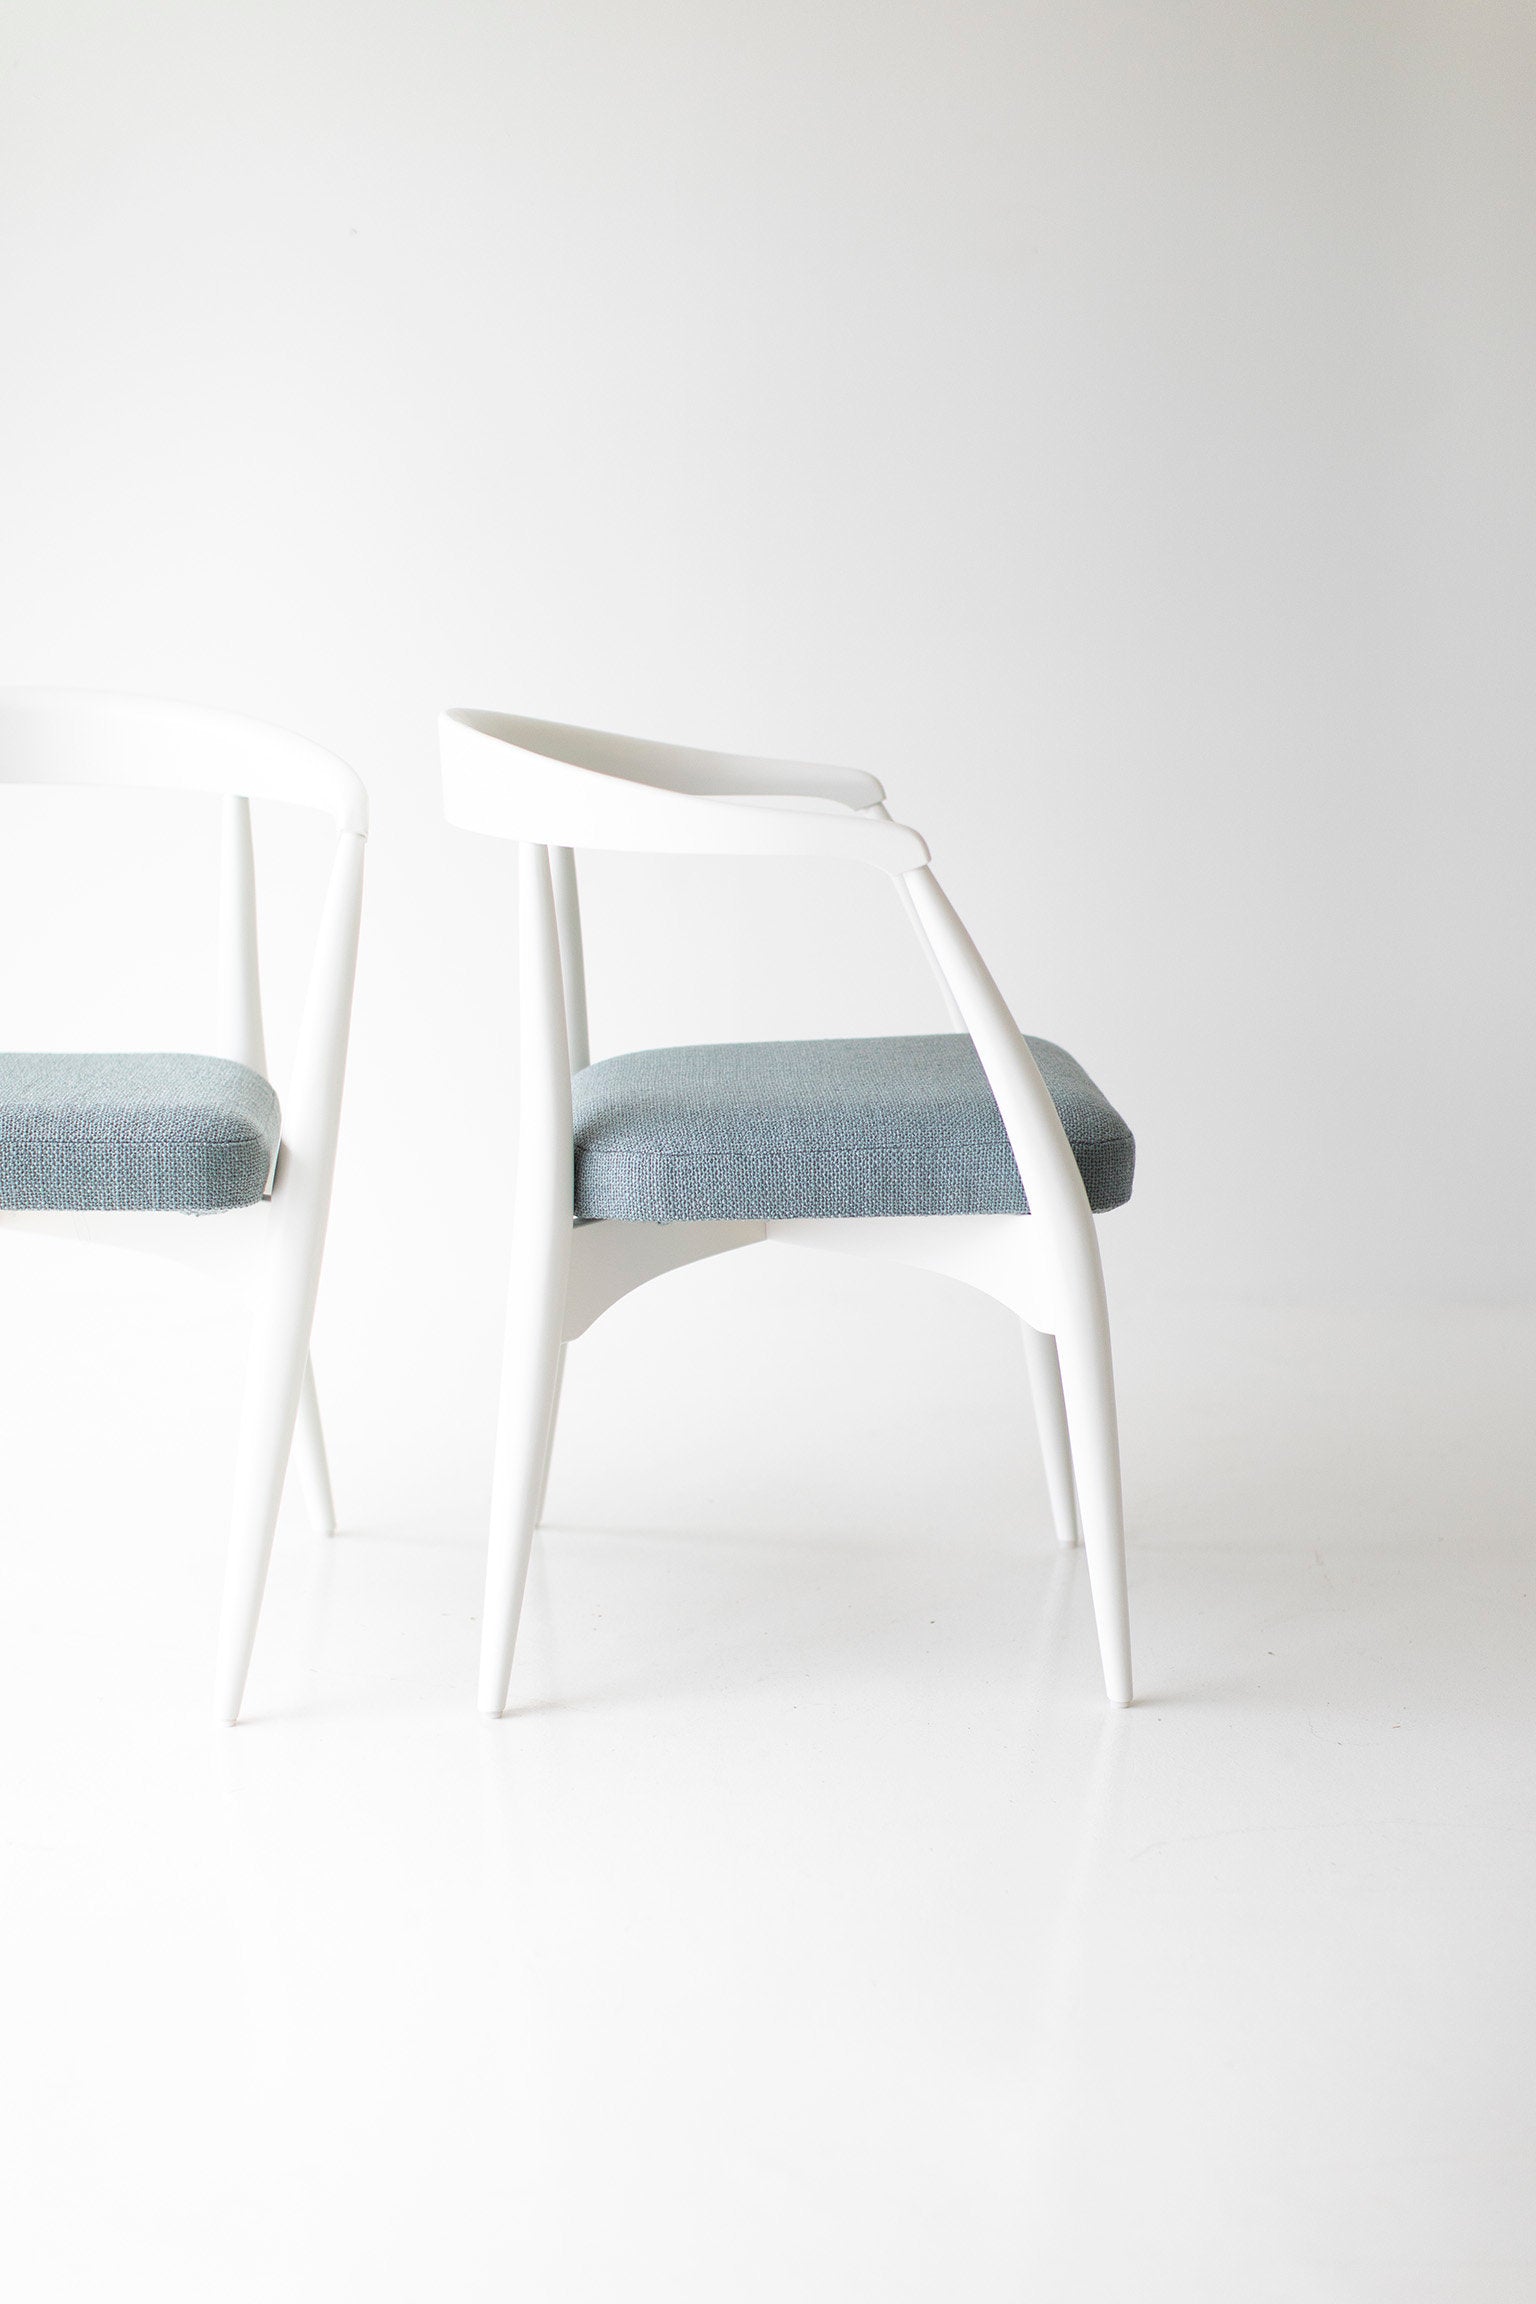 Lawrence-Peabody-White-Dining-Chairs-04